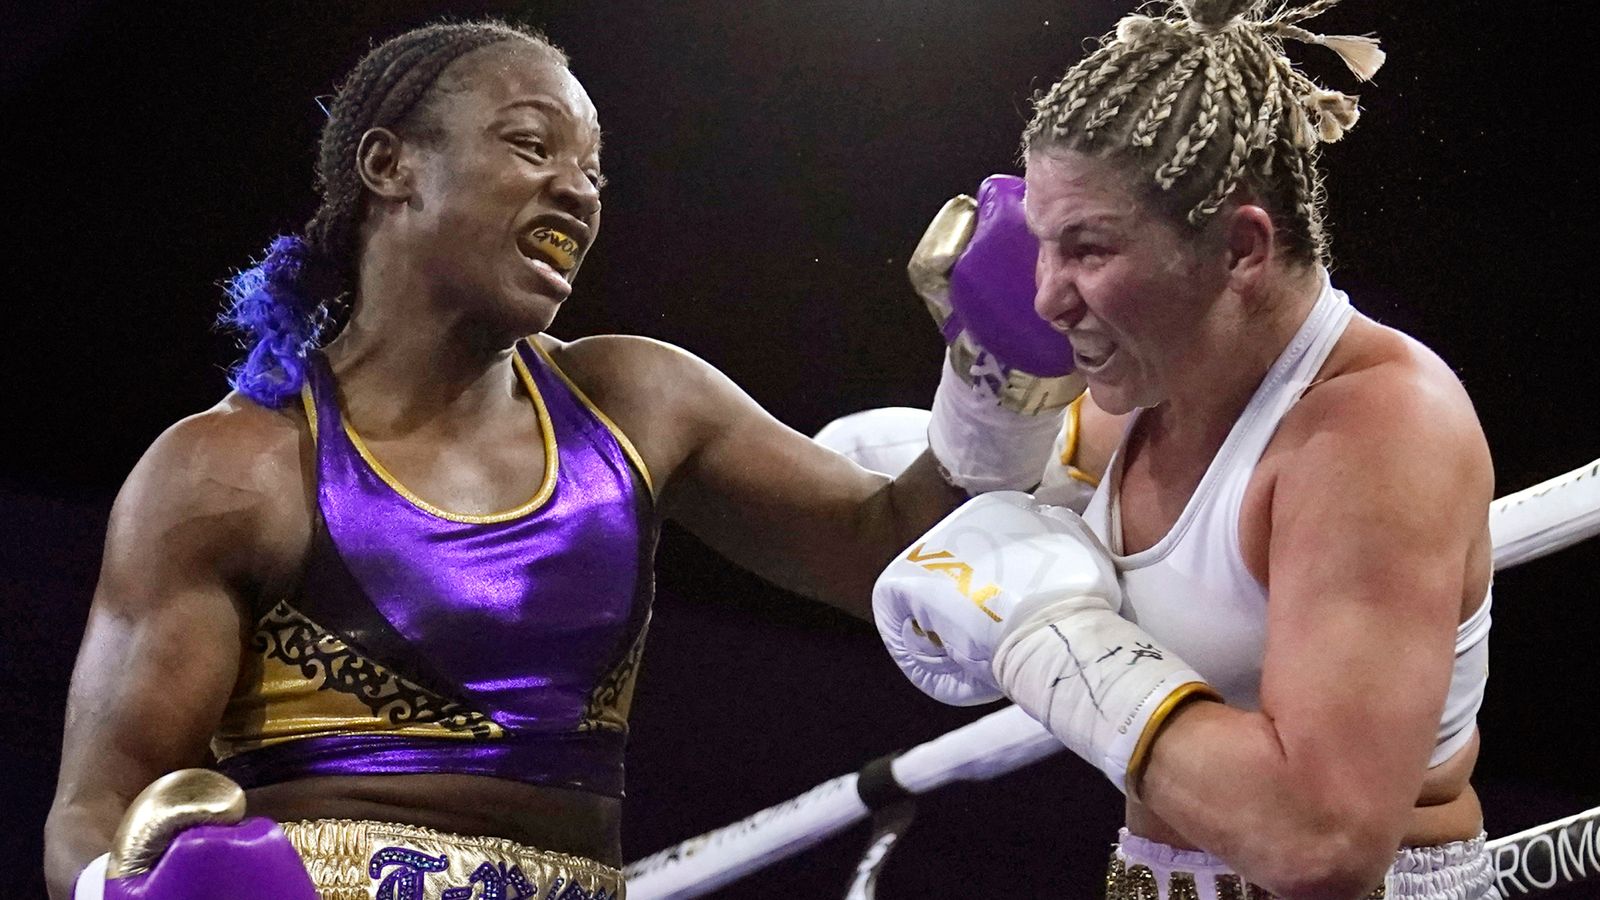 Claressa Shields: I have the skills to beat world's best female boxers